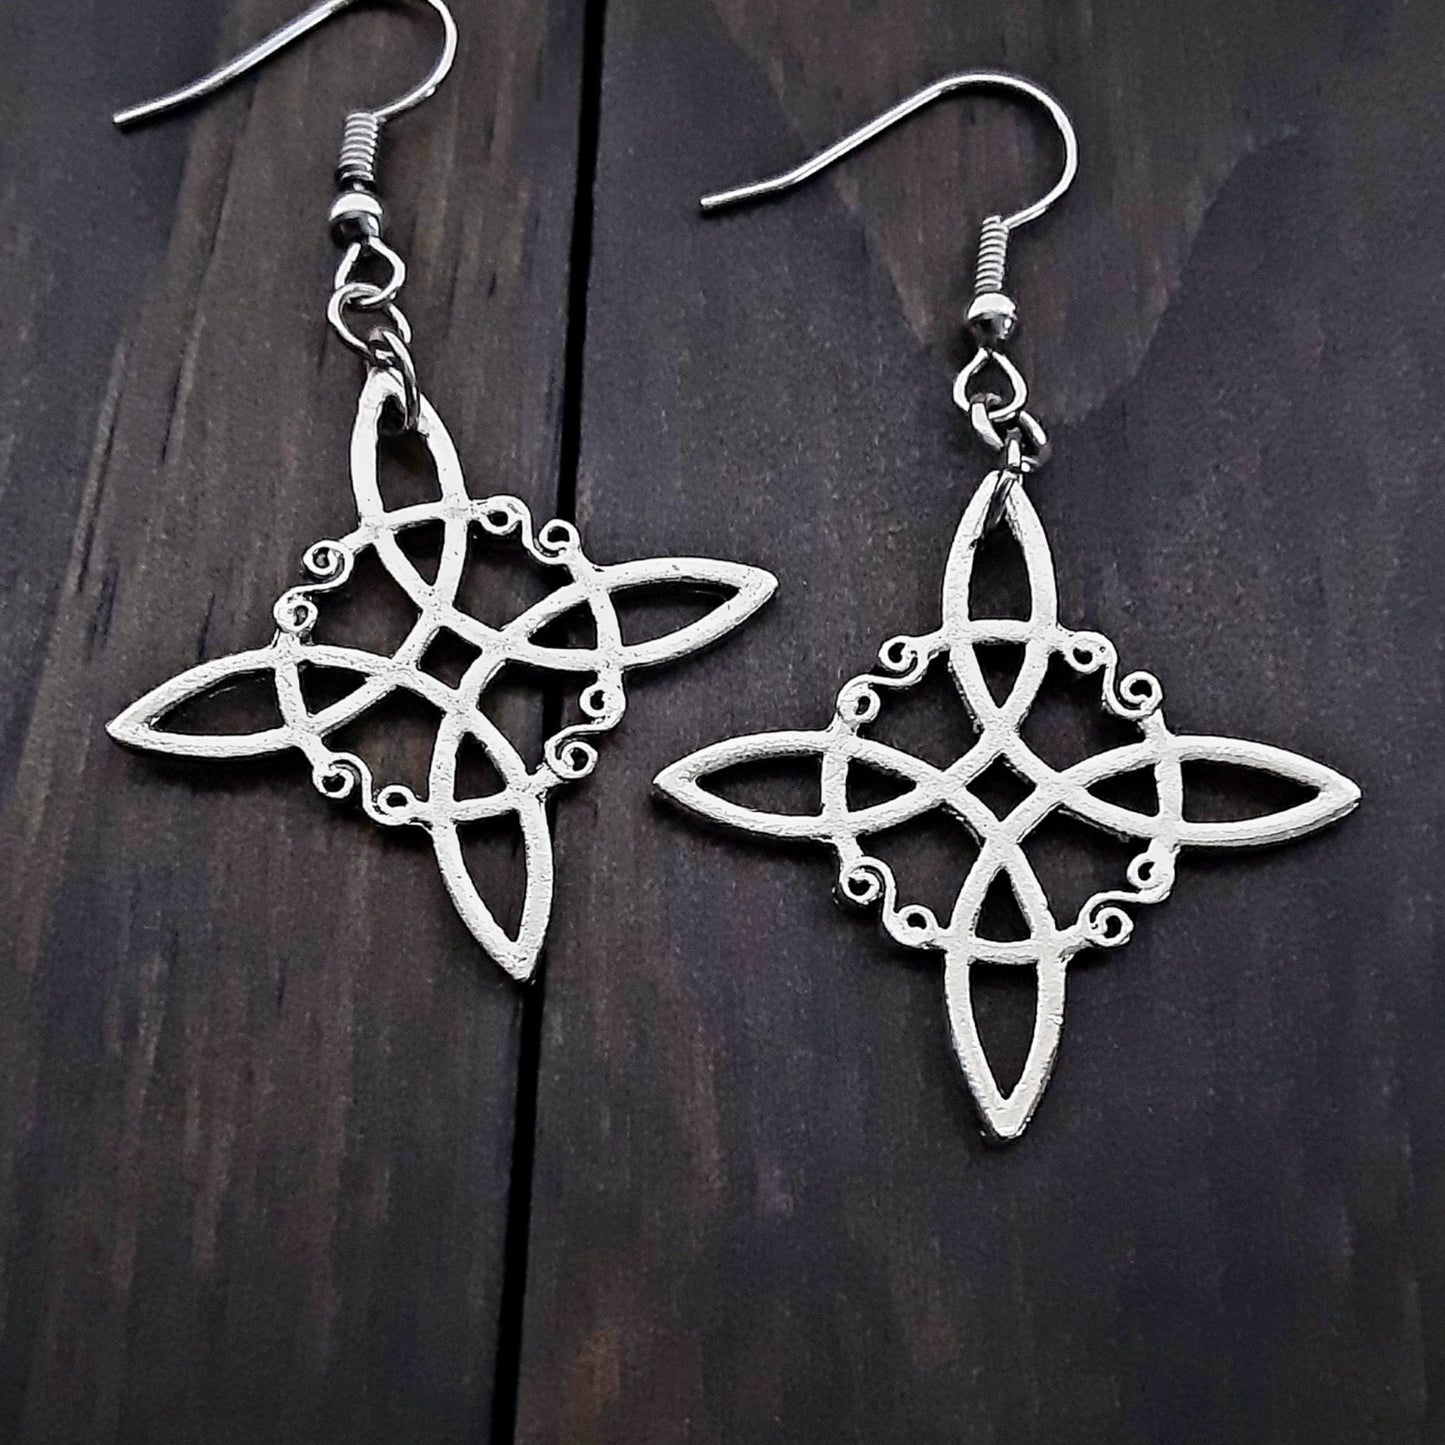 Witch knot protection charm earrings